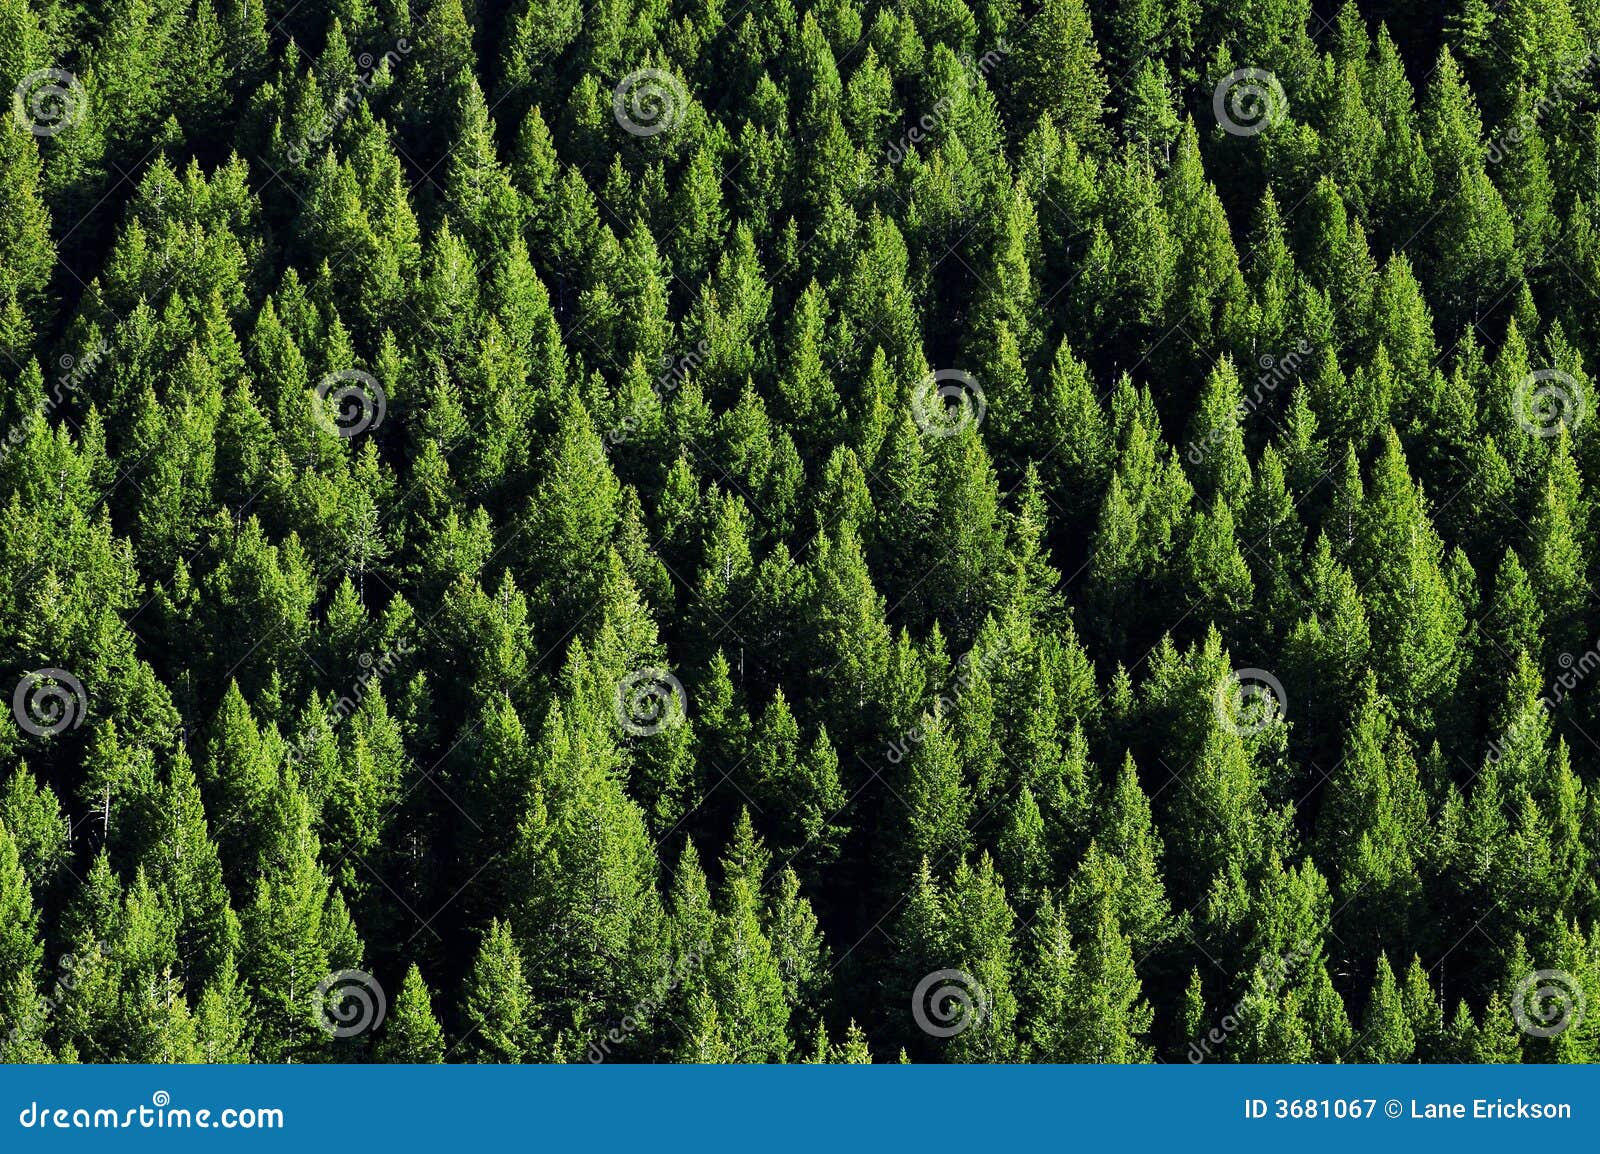 forrest of pine trees